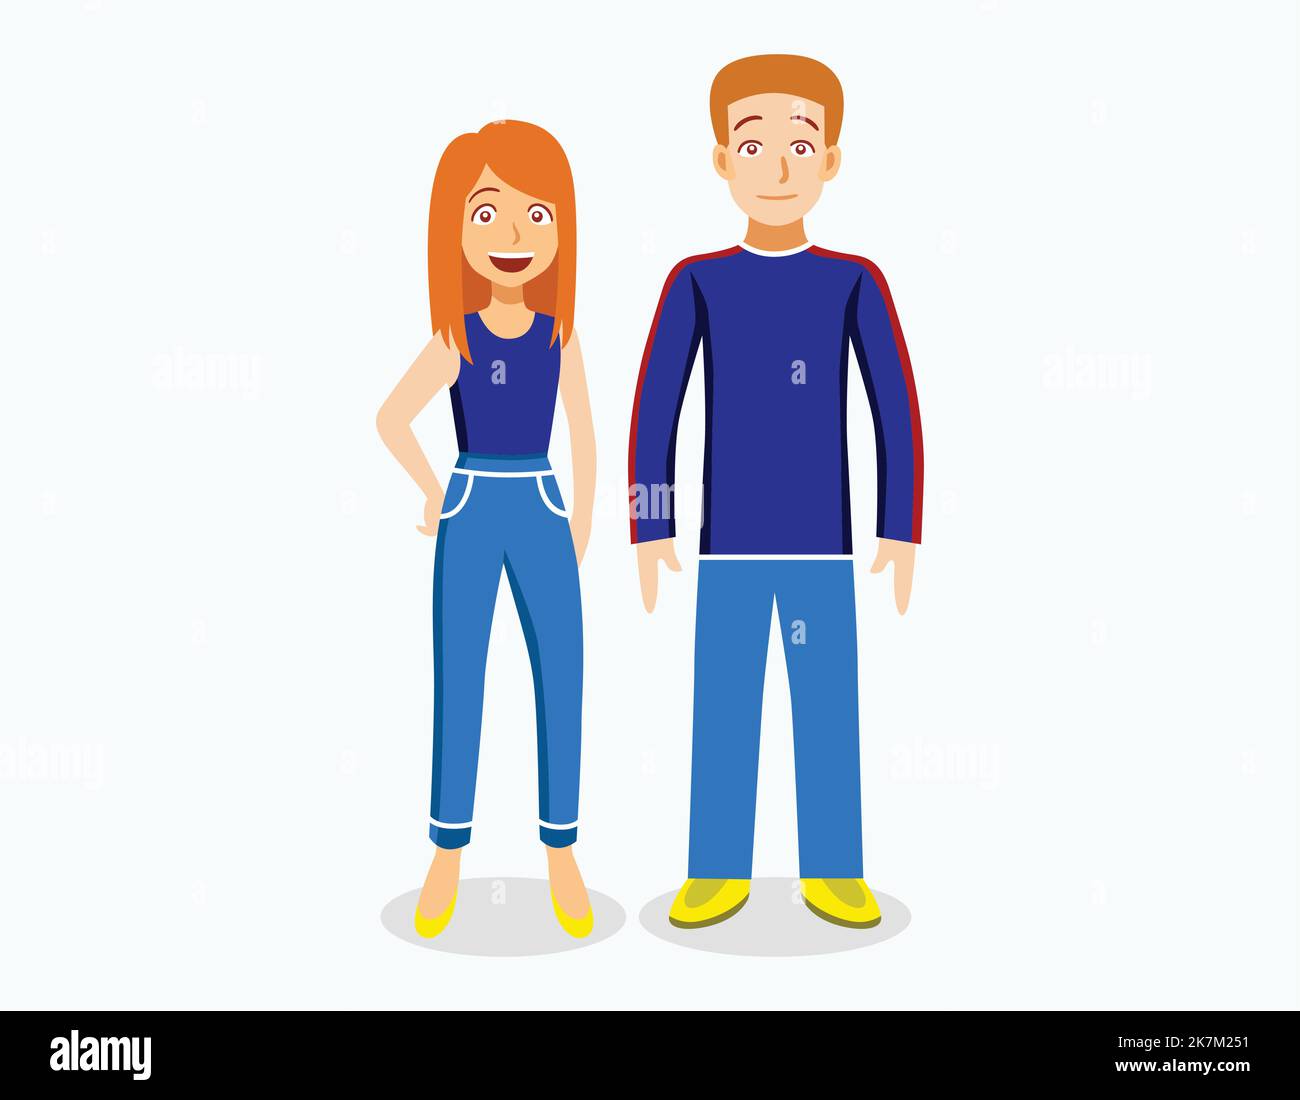 american couple character illustration on white isolated background Stock Vector